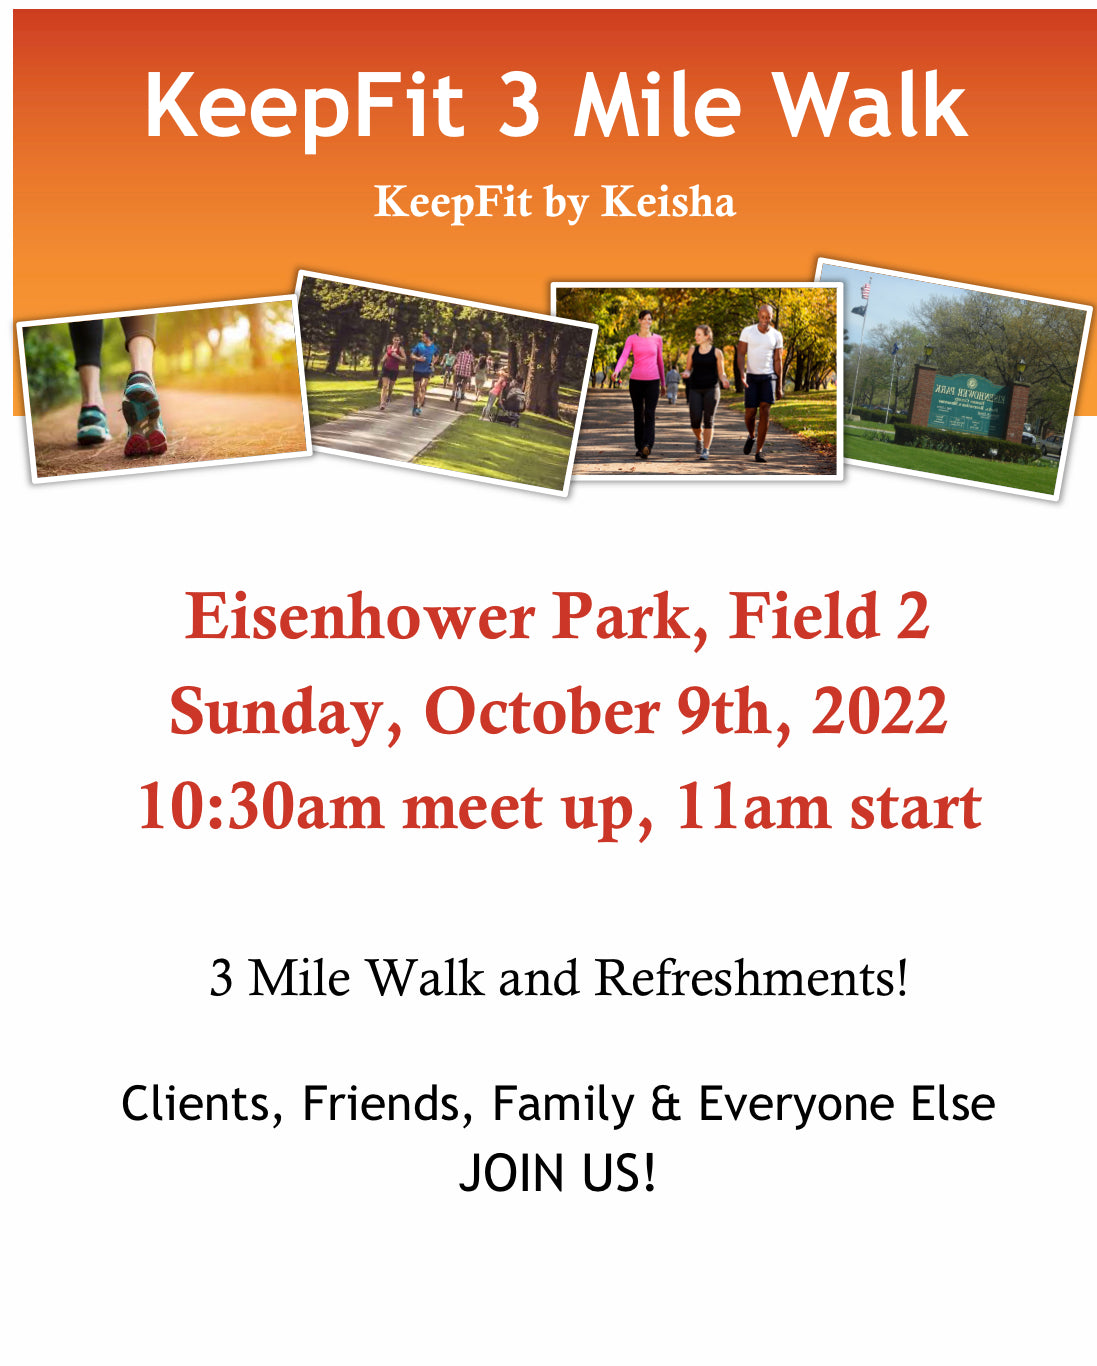 KeepFit 3 Mile Walk Event Coming Up